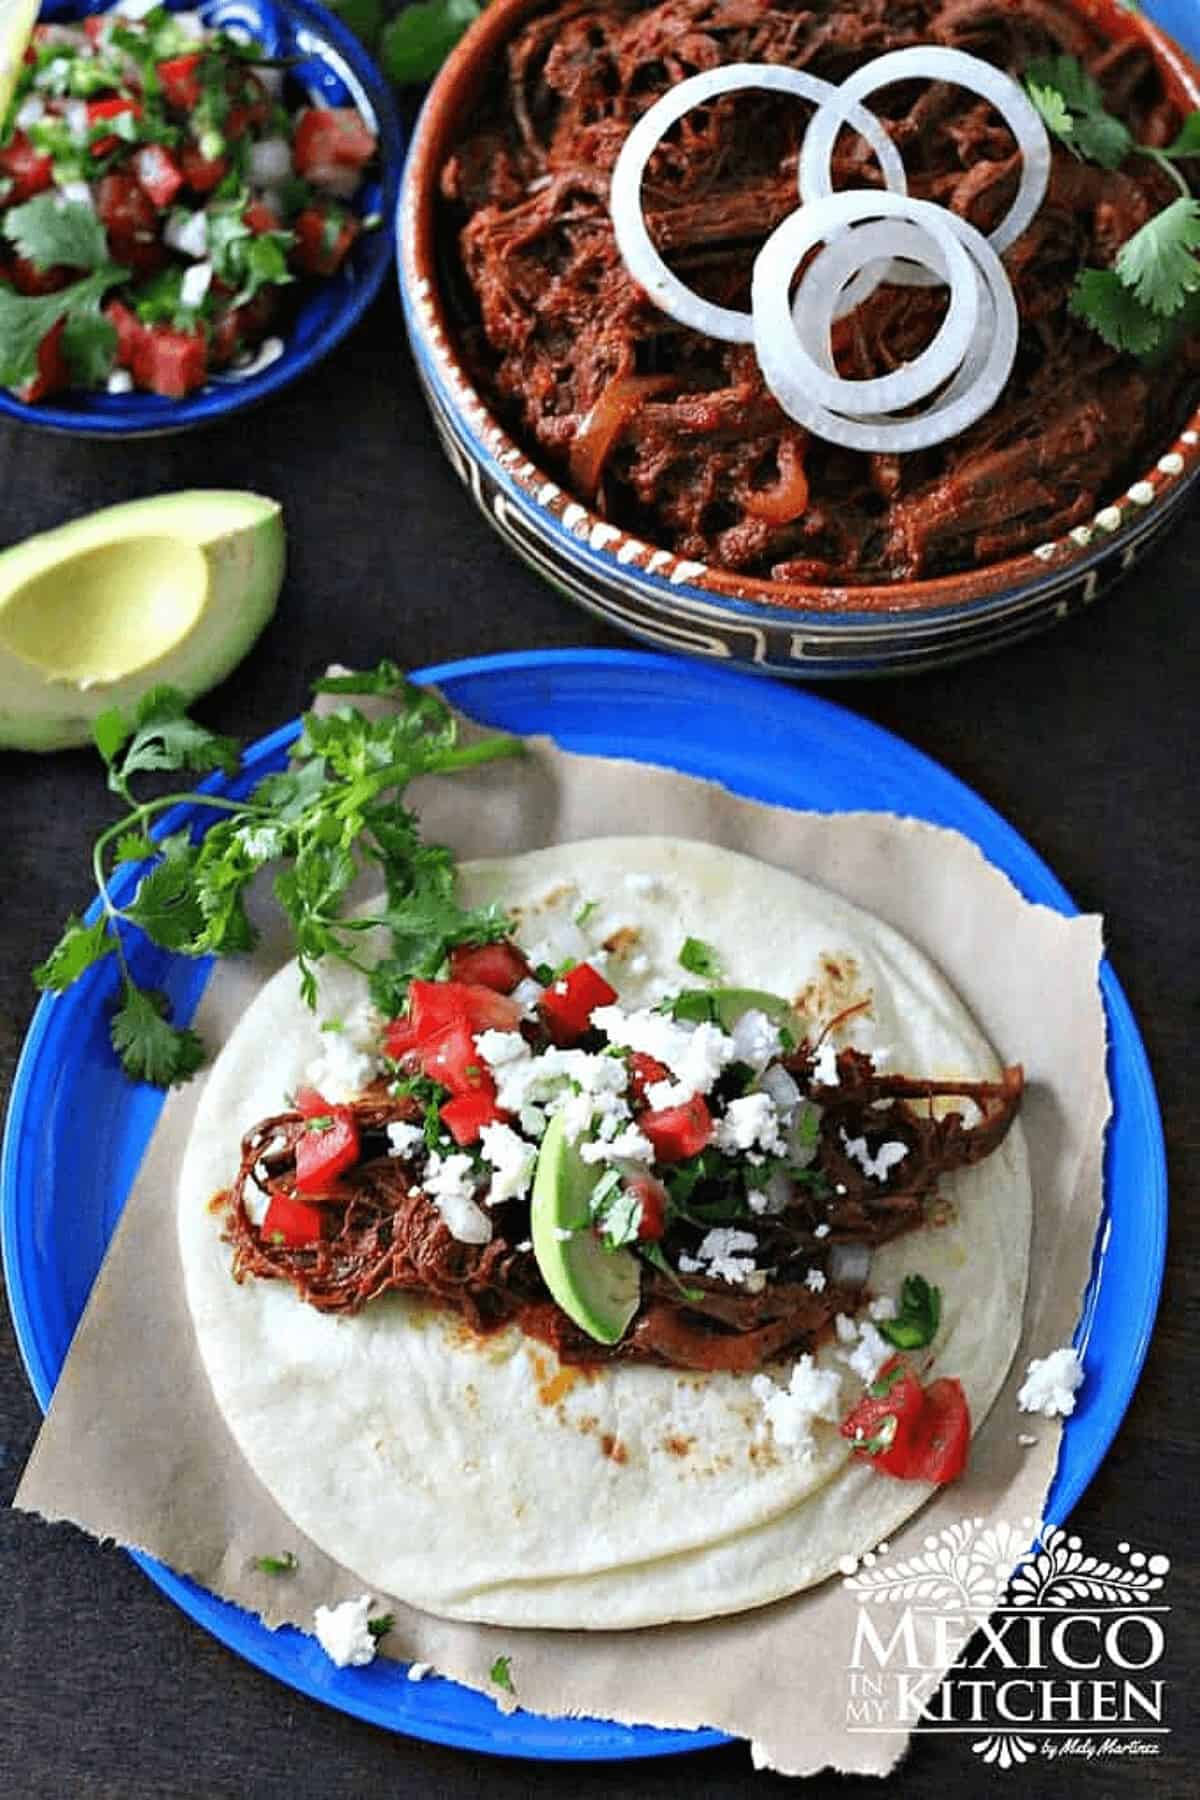 Shredded beef with ancho chiles tacos, garnished with avocado, queso fresco and cilantro.